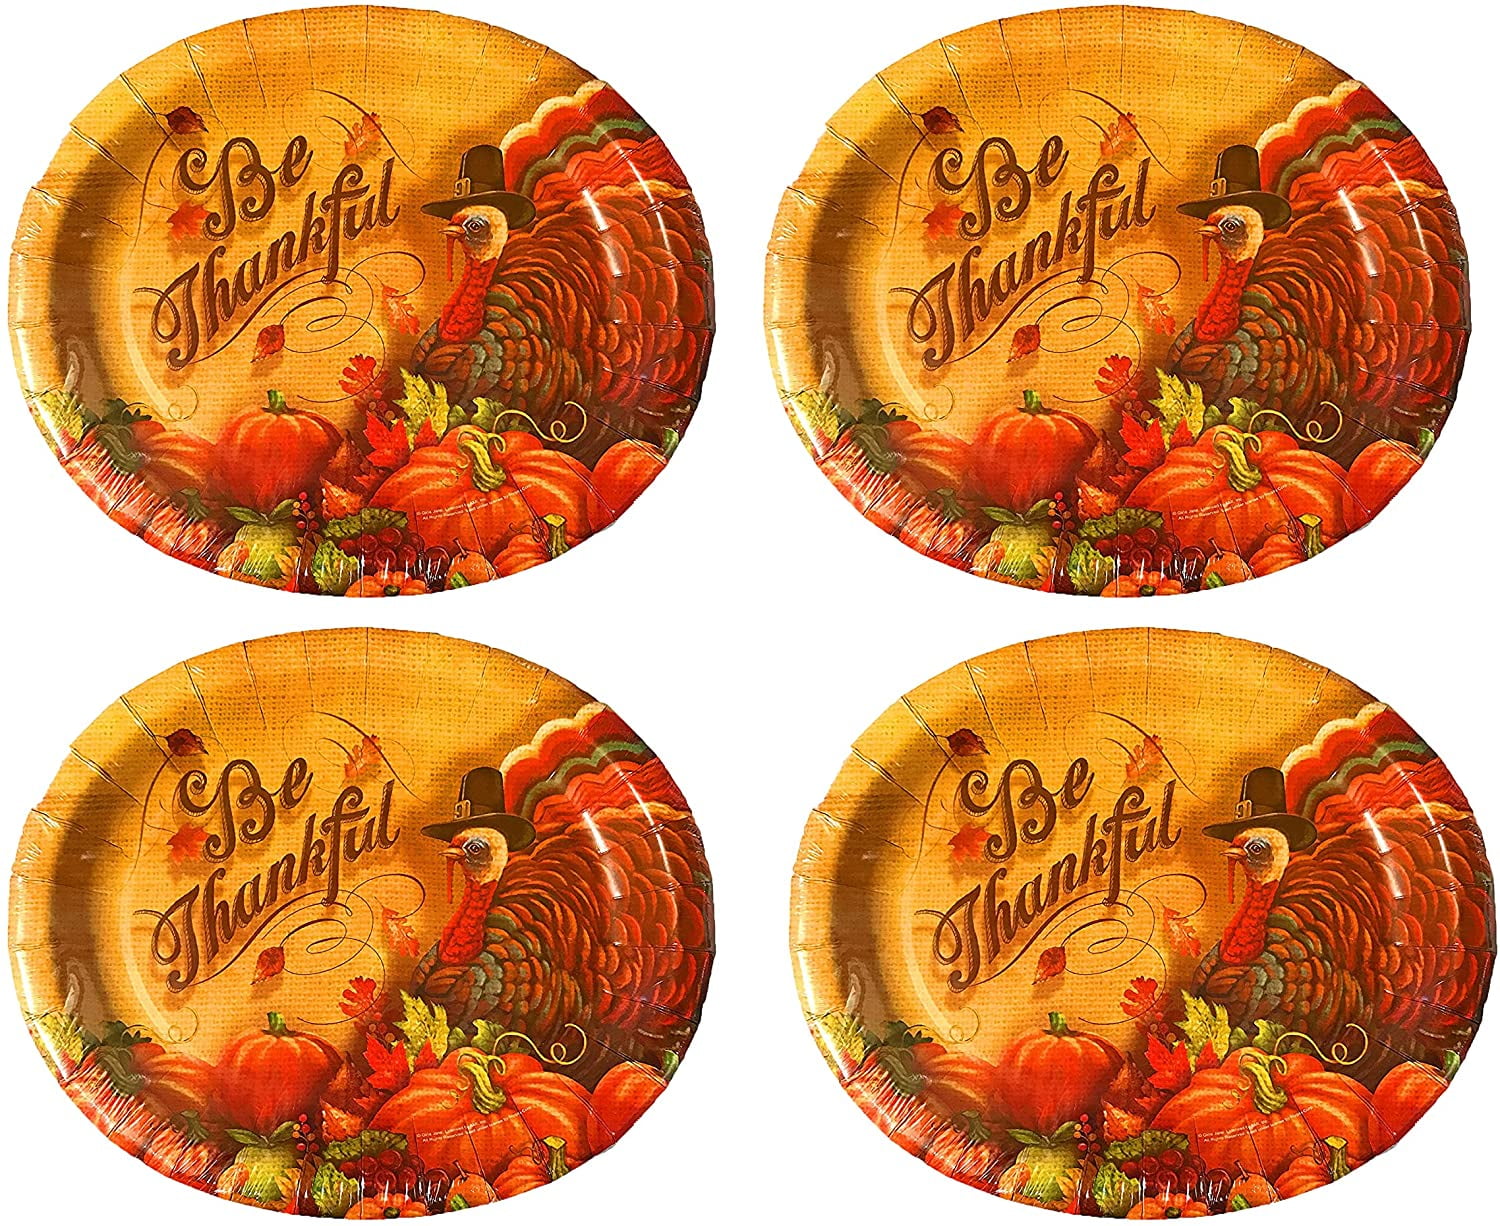 Aluminum Oval Pan Thanksgiving Dinner 125 Pack - Disposable THANKSGIVING  SALE!!!